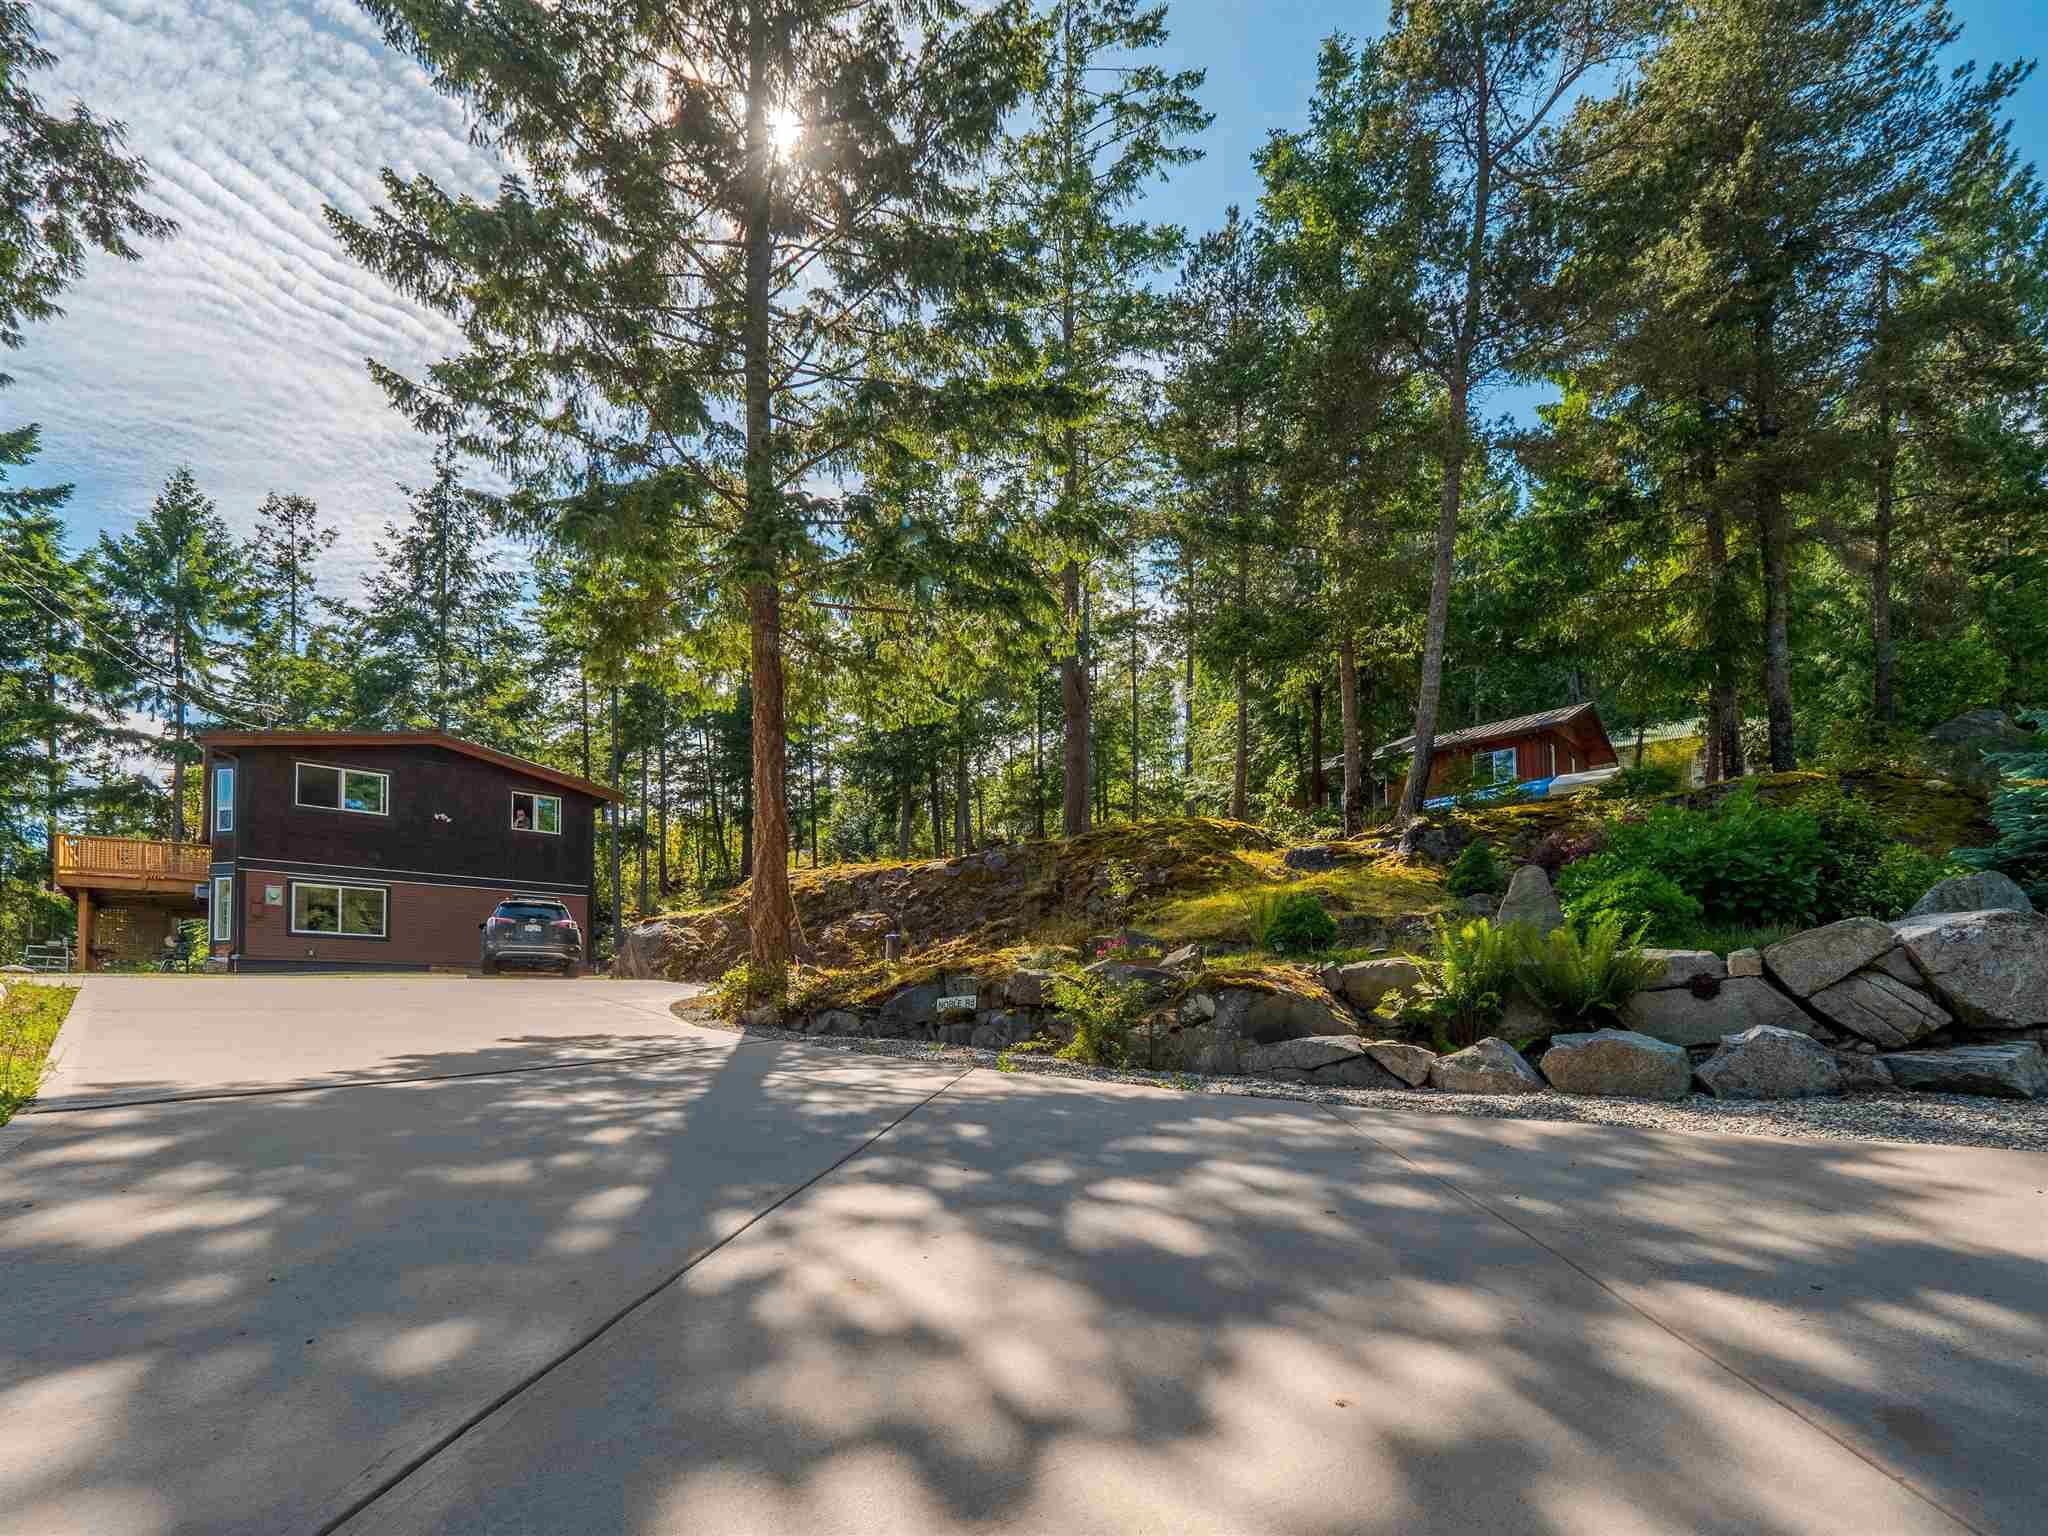 I have sold a property at 5771 LEANING TREE RD in Halfmoon Bay
